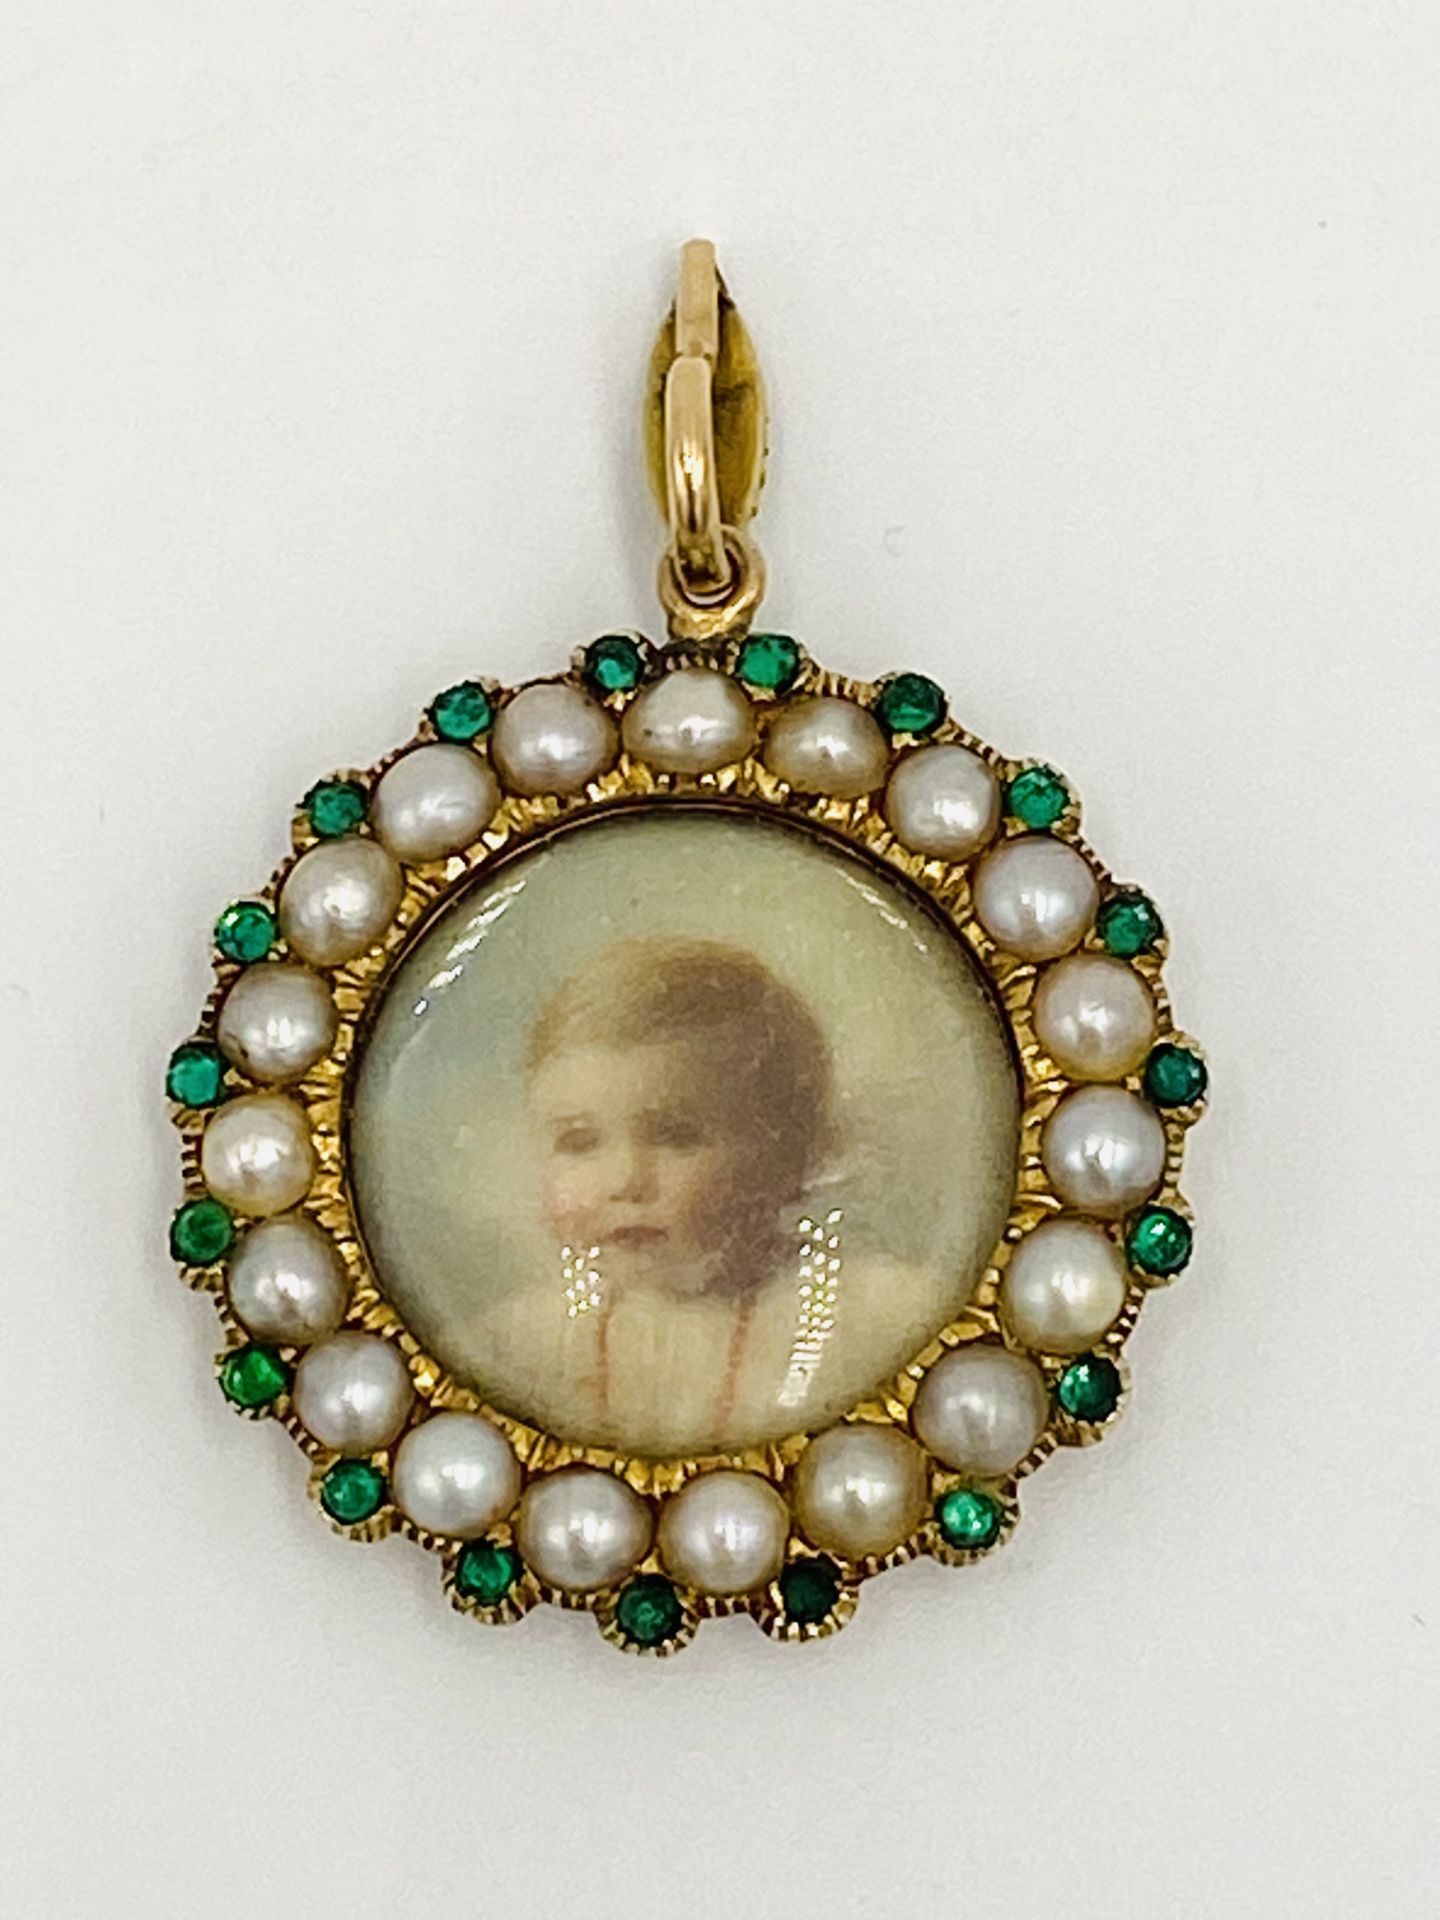 Portrait pendant with pearl and emerald surround